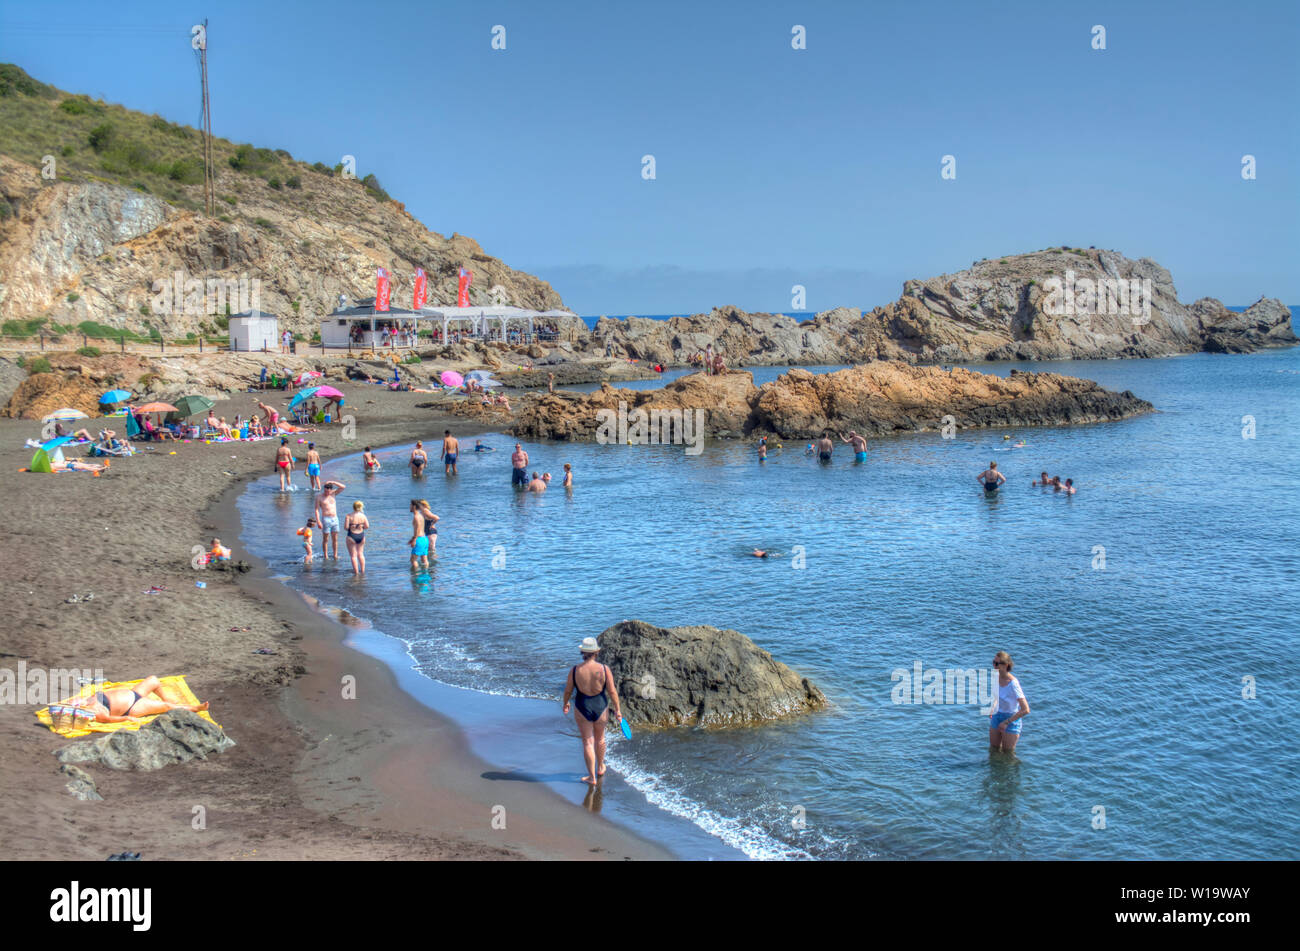 HDR image of the Black sand beach at Portman in Murcia, Spain Stock Photo